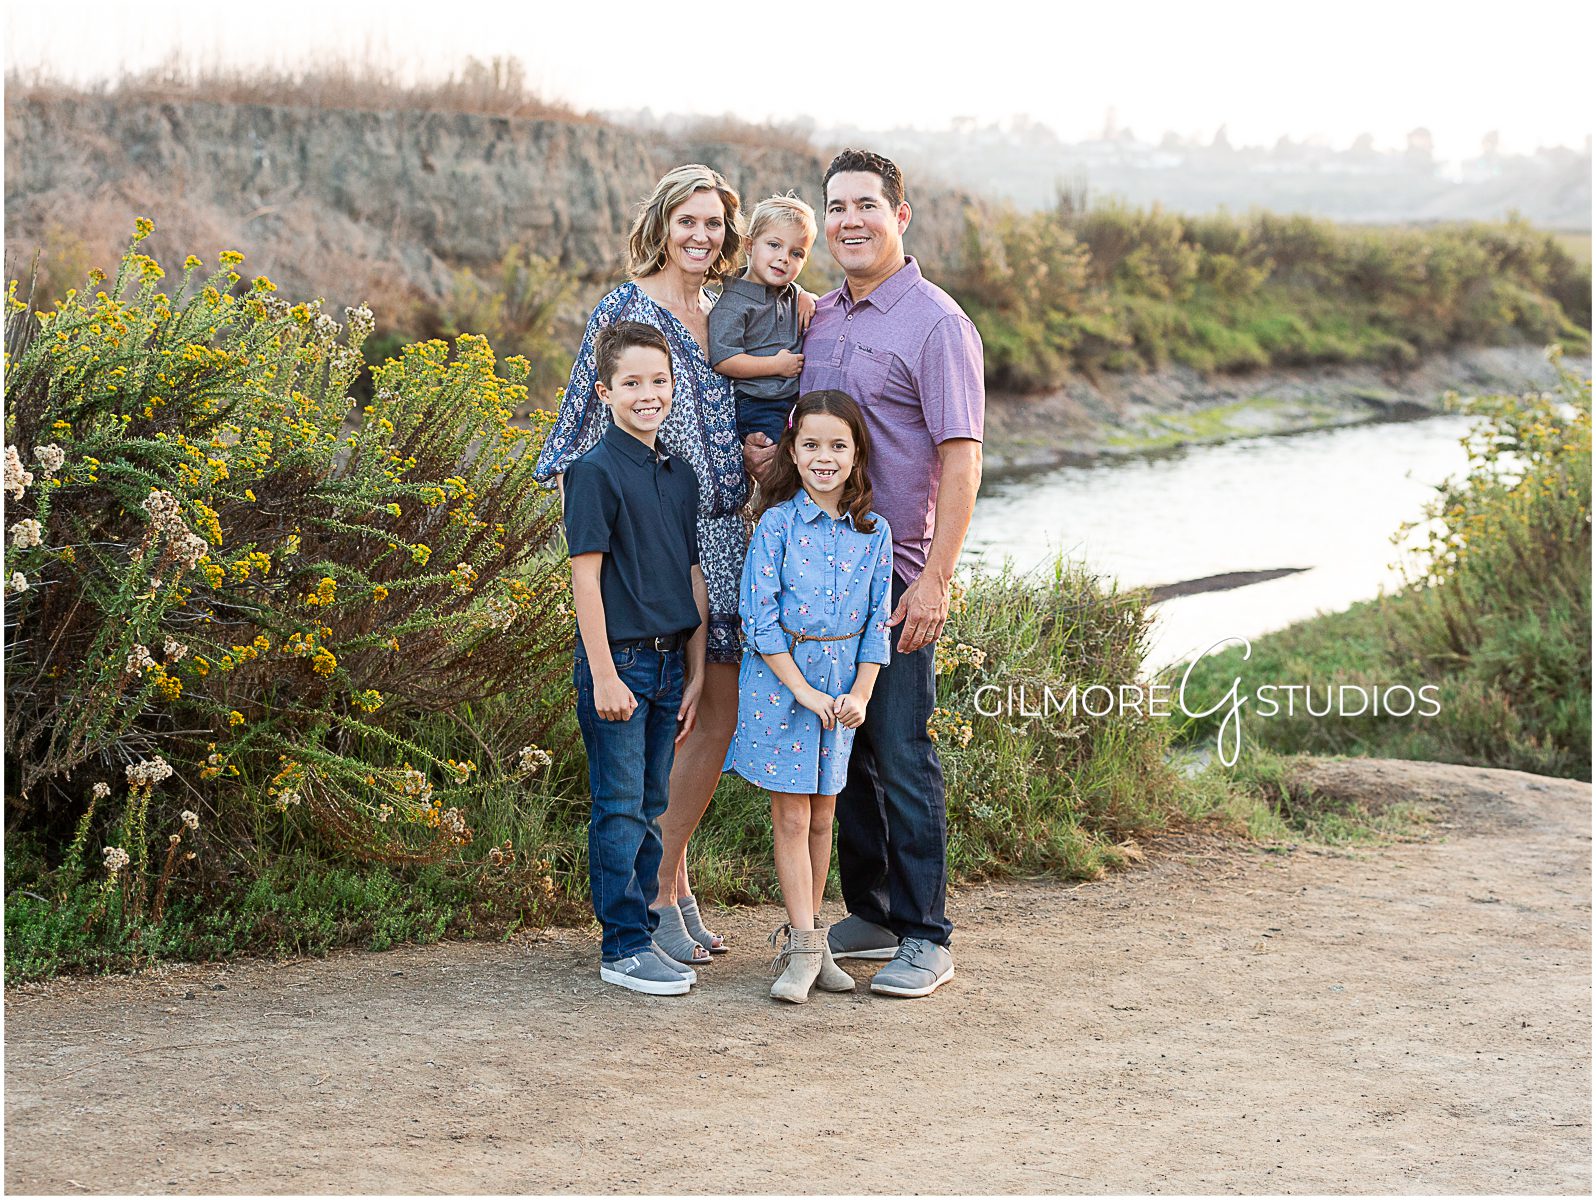 Newport Back Bay Family Photographer, Newport Beach, CA, families, outfit ideas, brother and sister, rustic, woods, wild flower, lifestyle family